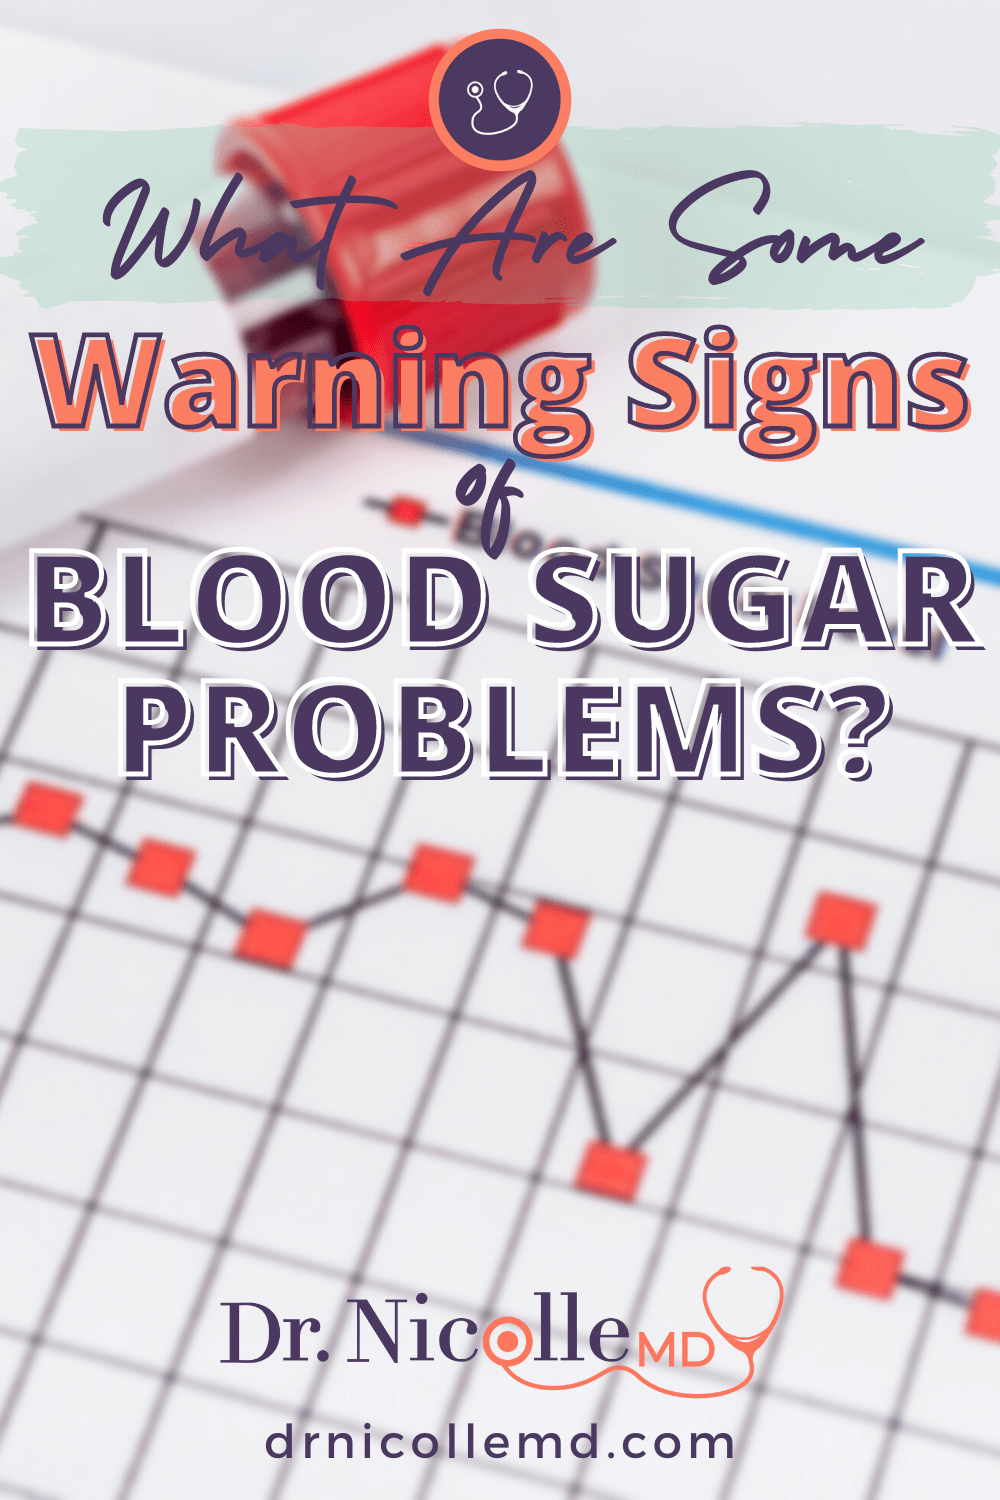 What Are Some Warning Signs of Blood Sugar Problems?